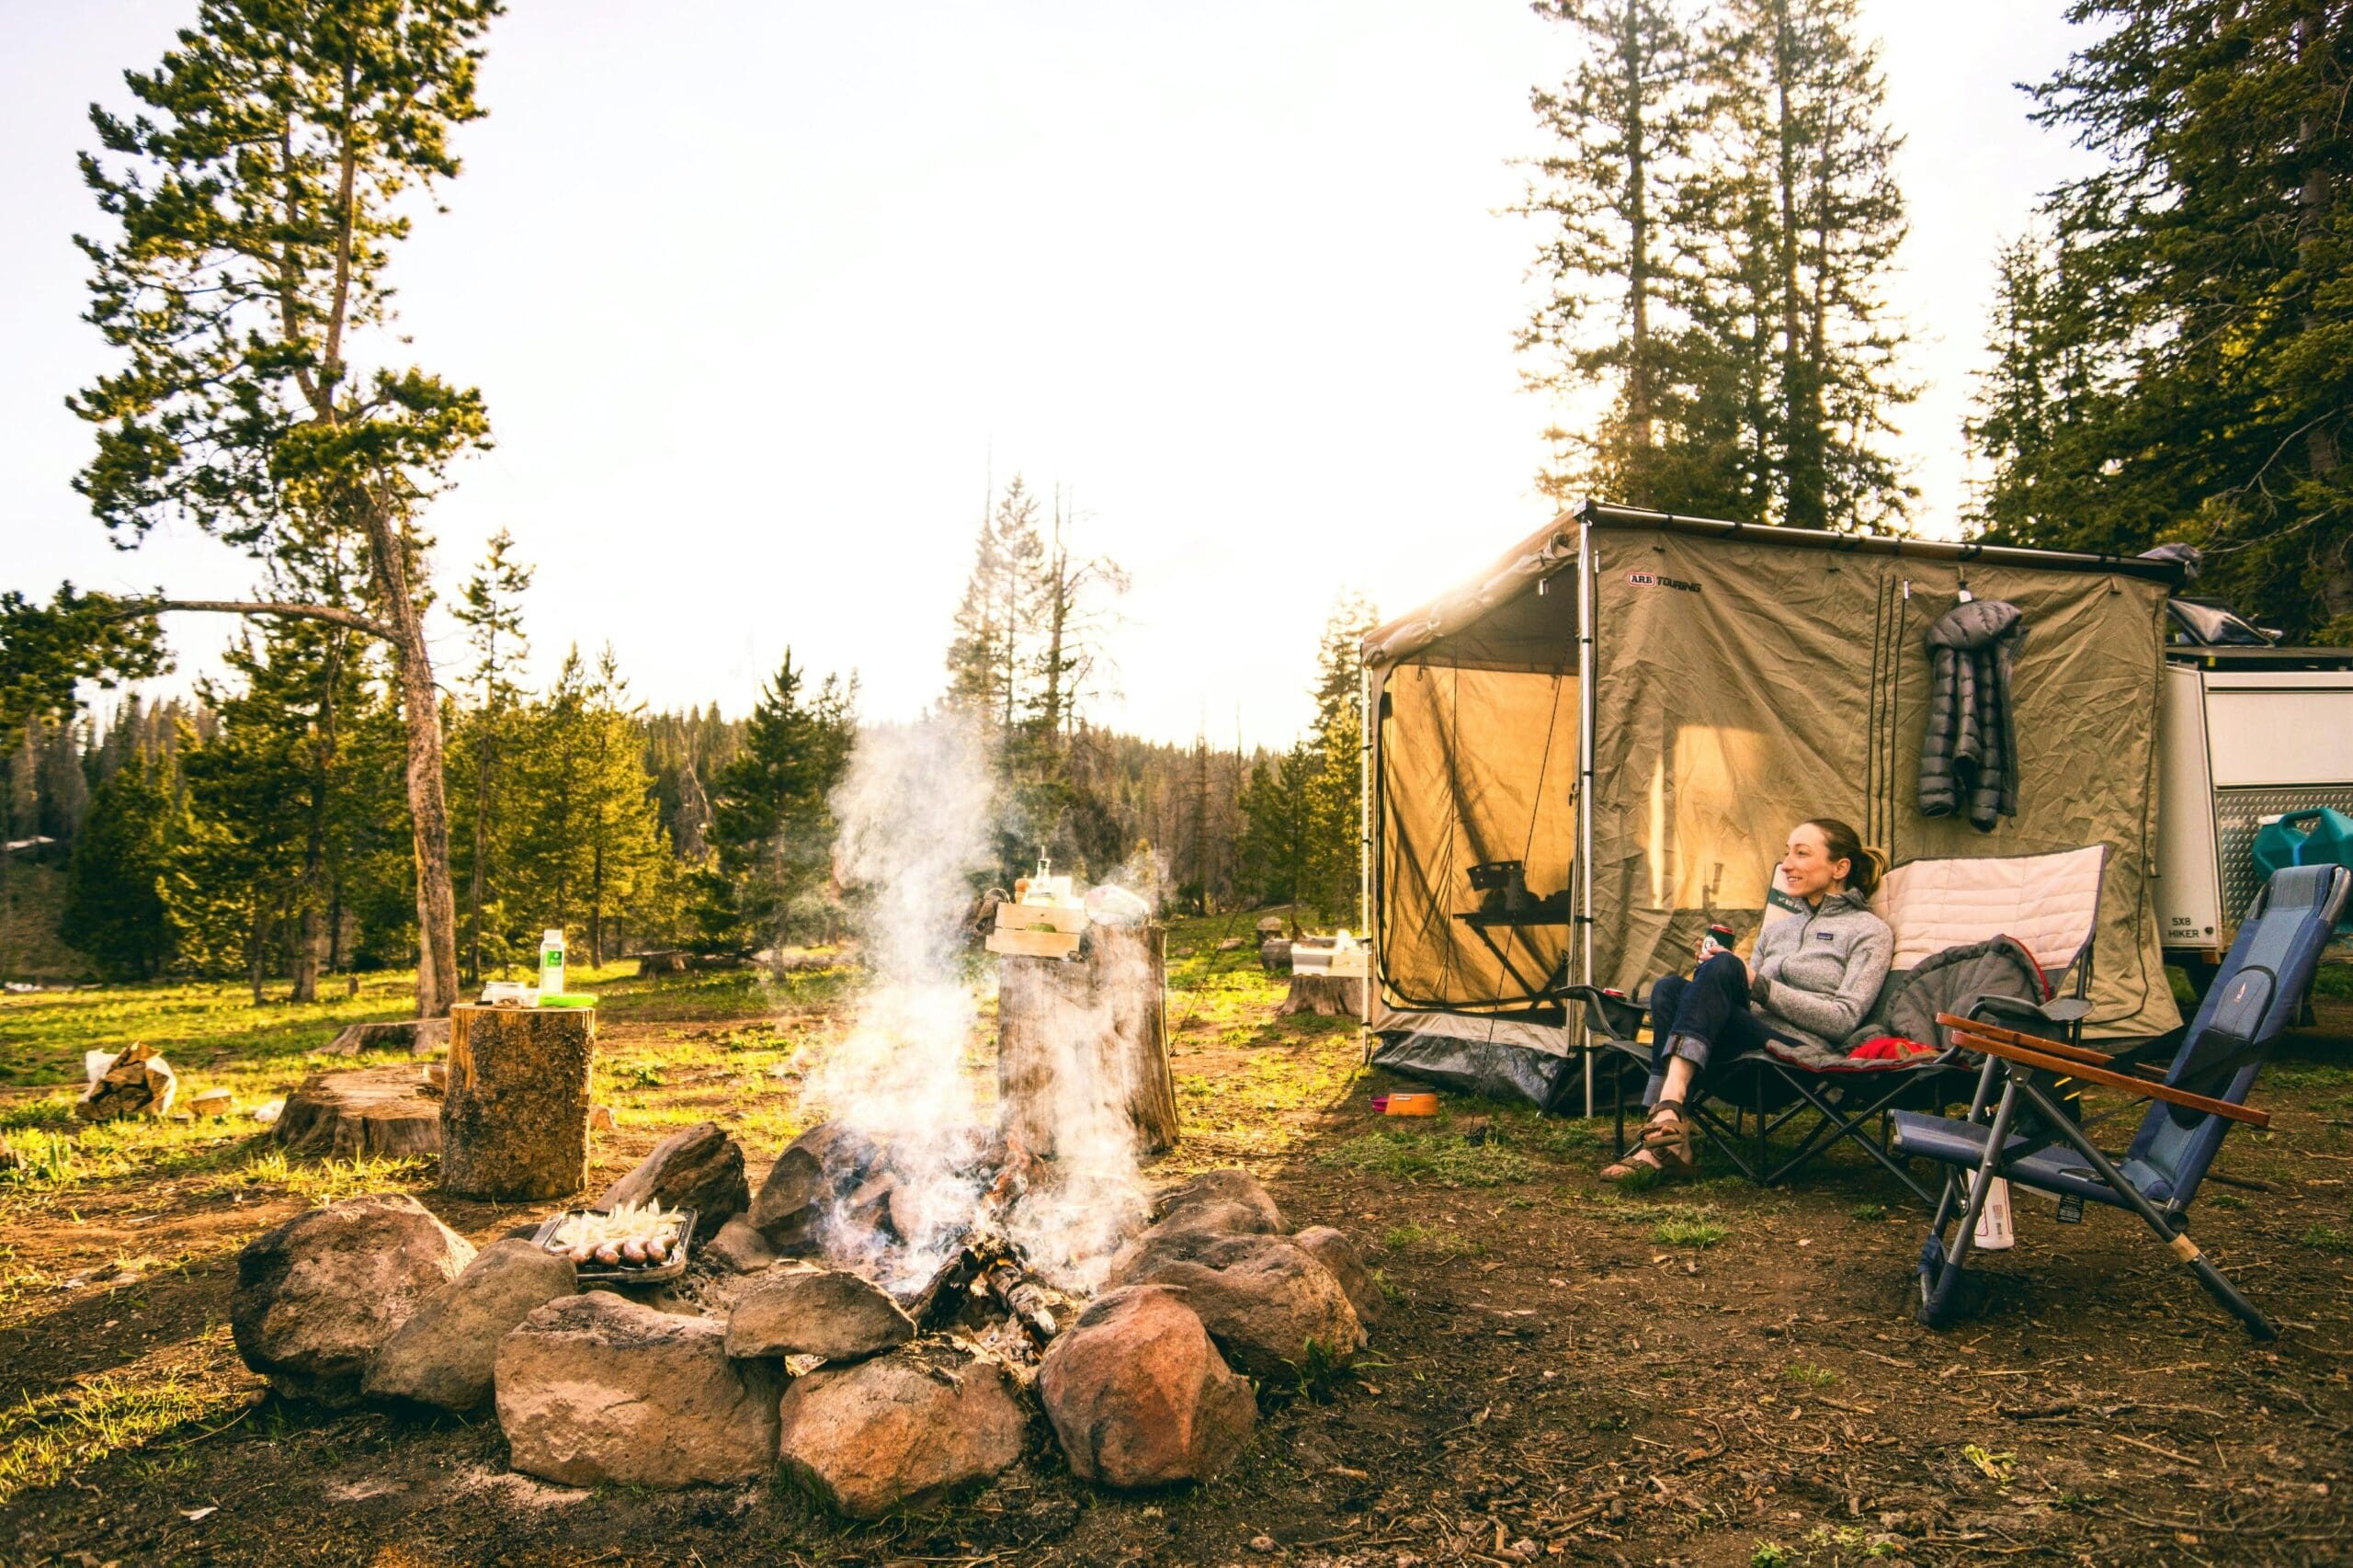 cooking while camping outdoors tips tricks